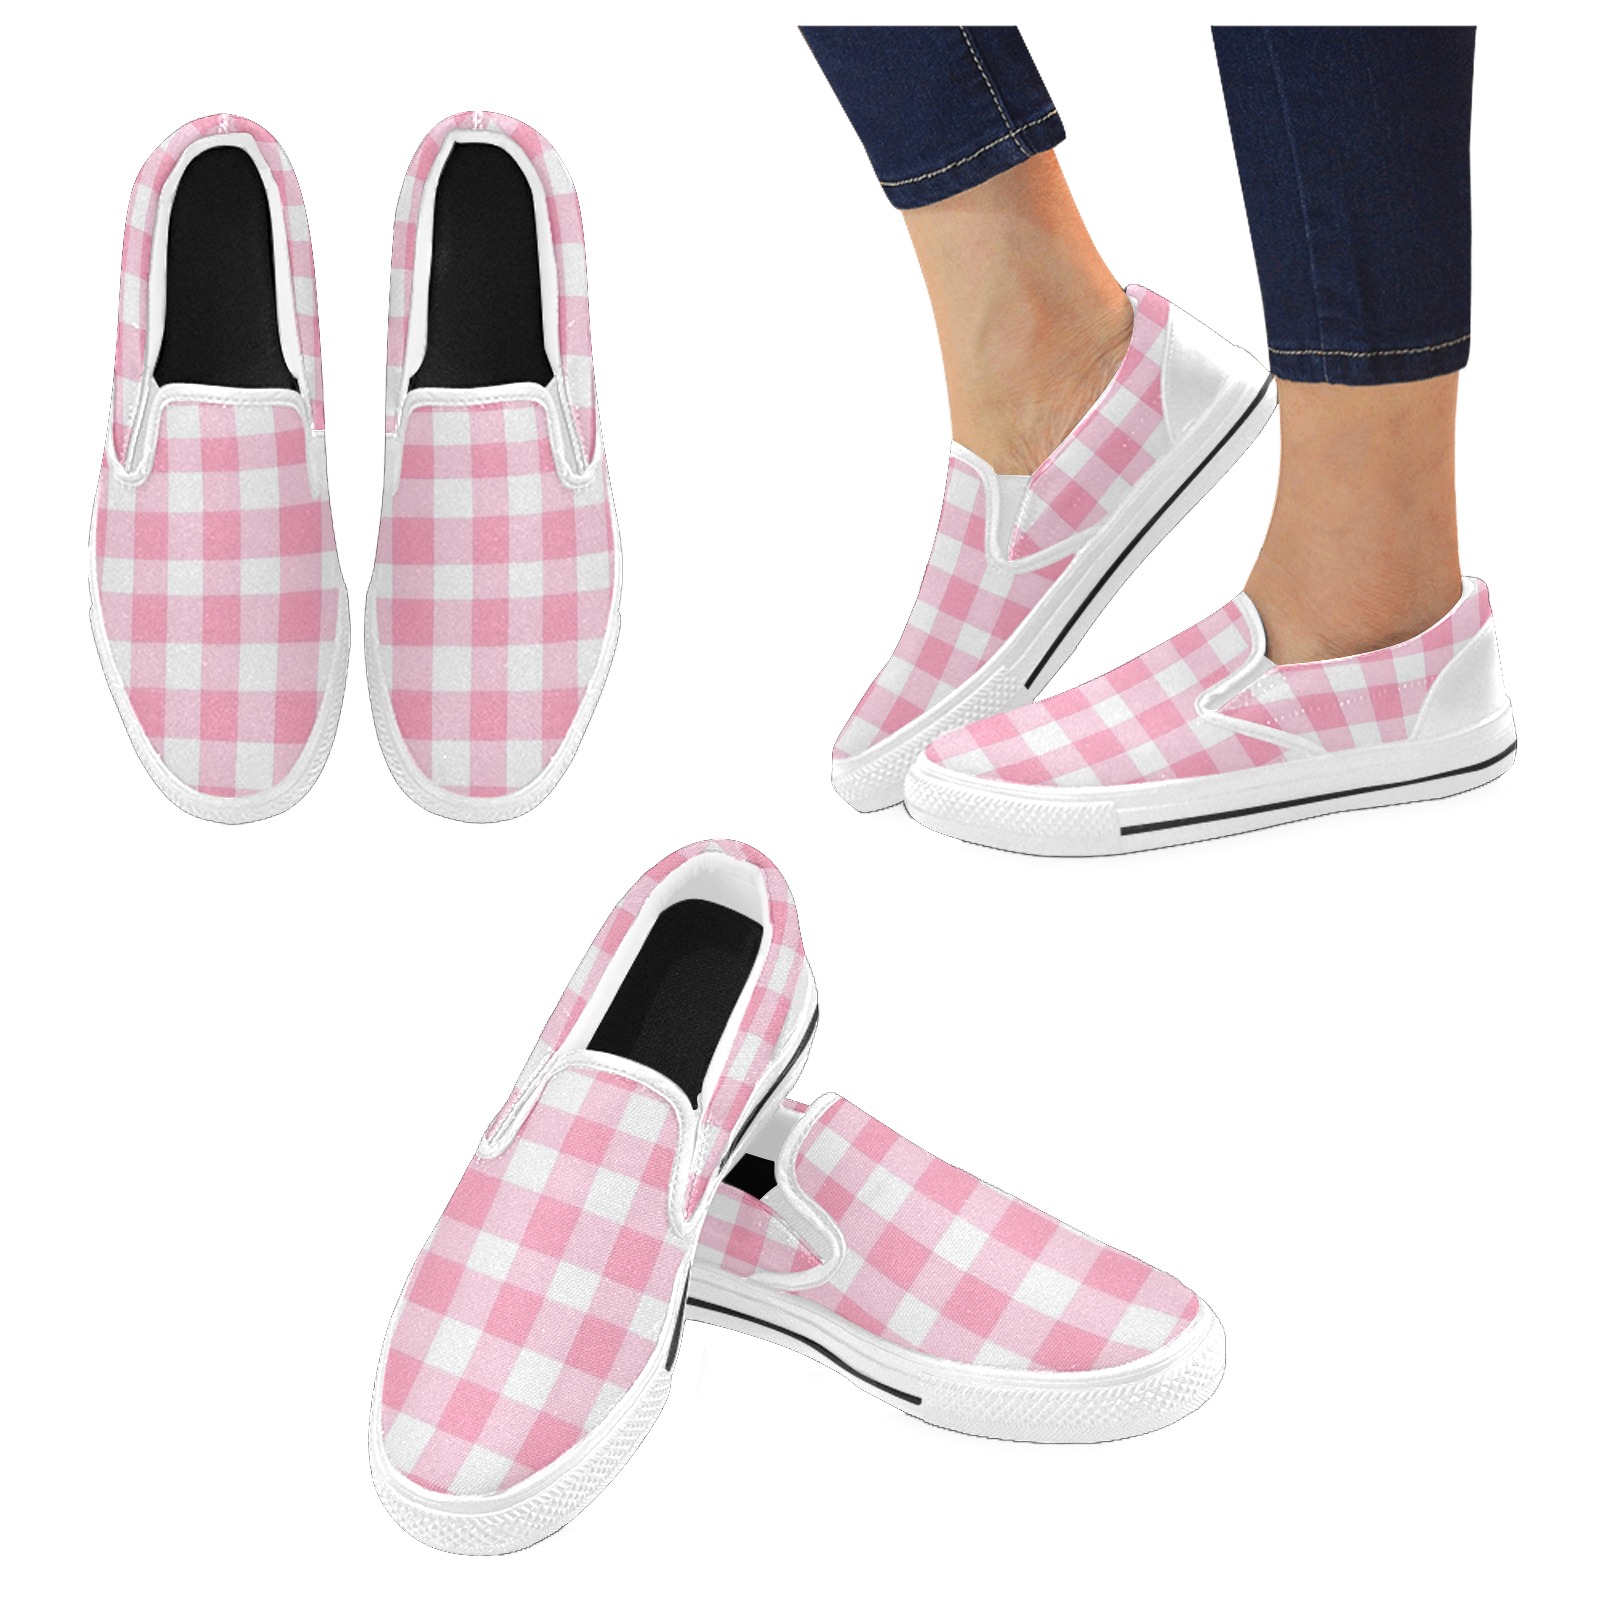 Mens Slip On Shoes Colorful Gingham=10 Women's Fashion Art Casual ...